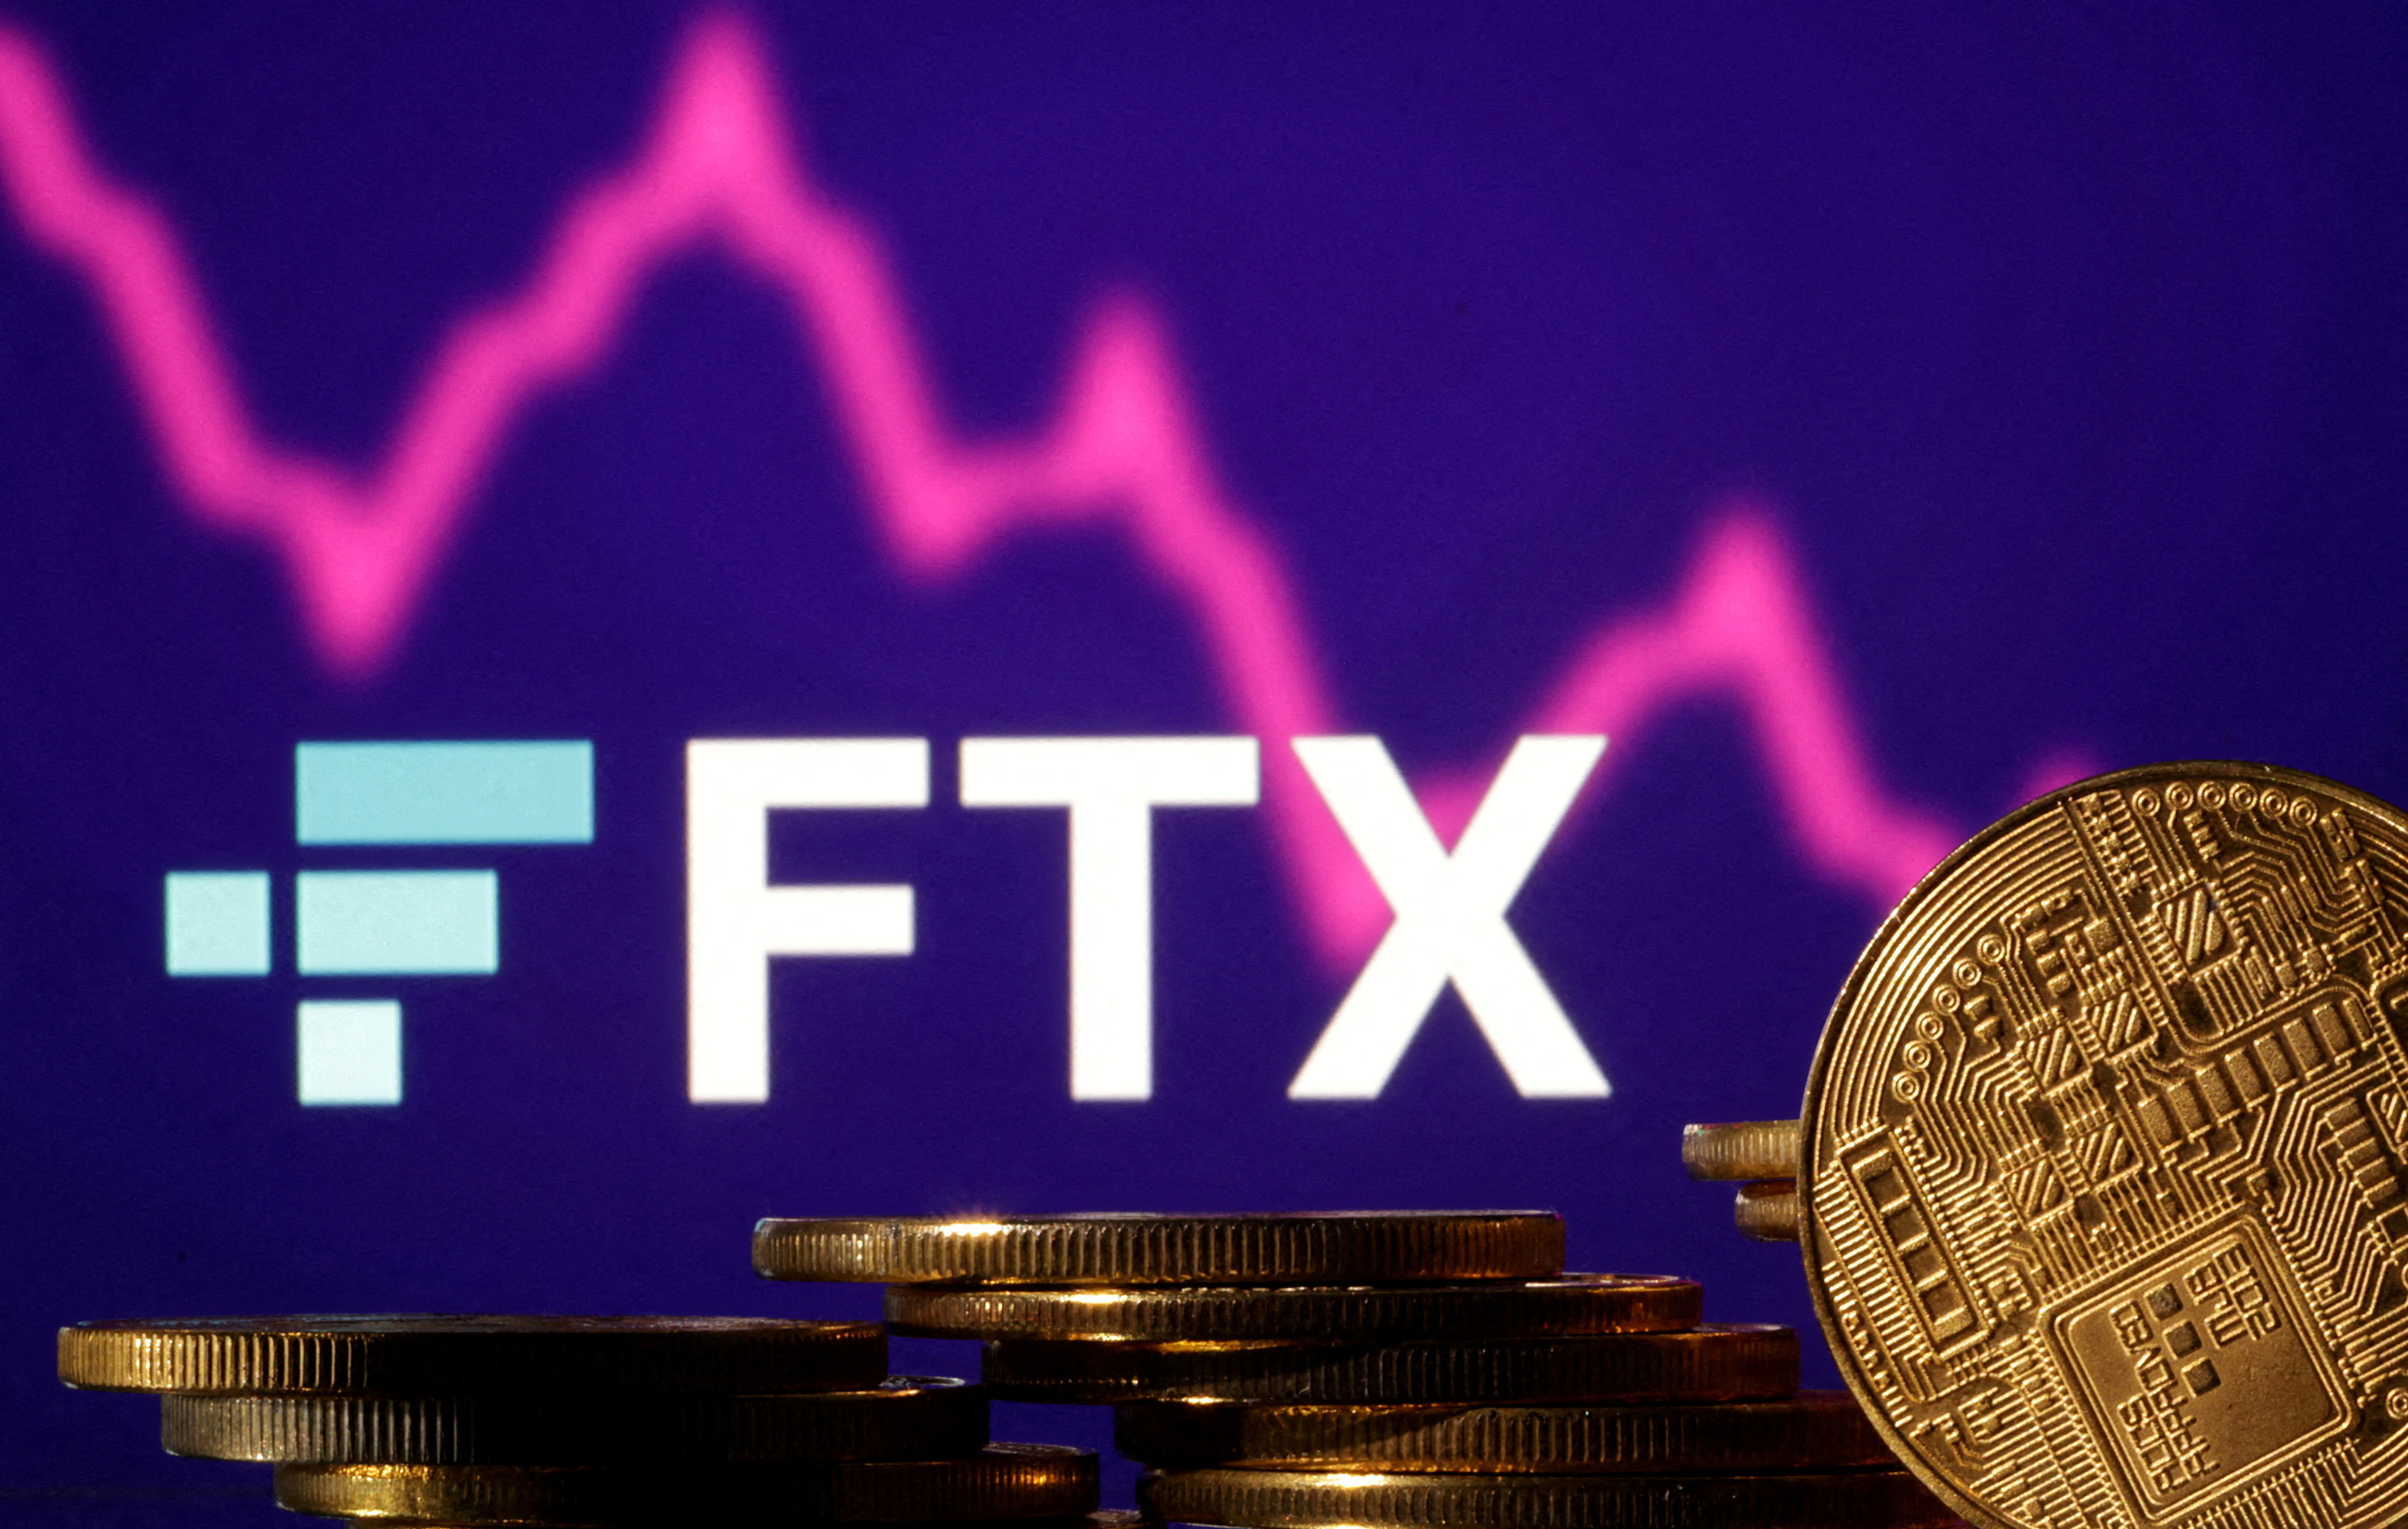 Illustration shows FTX logo, stock graph and representation of cryptocurrencies